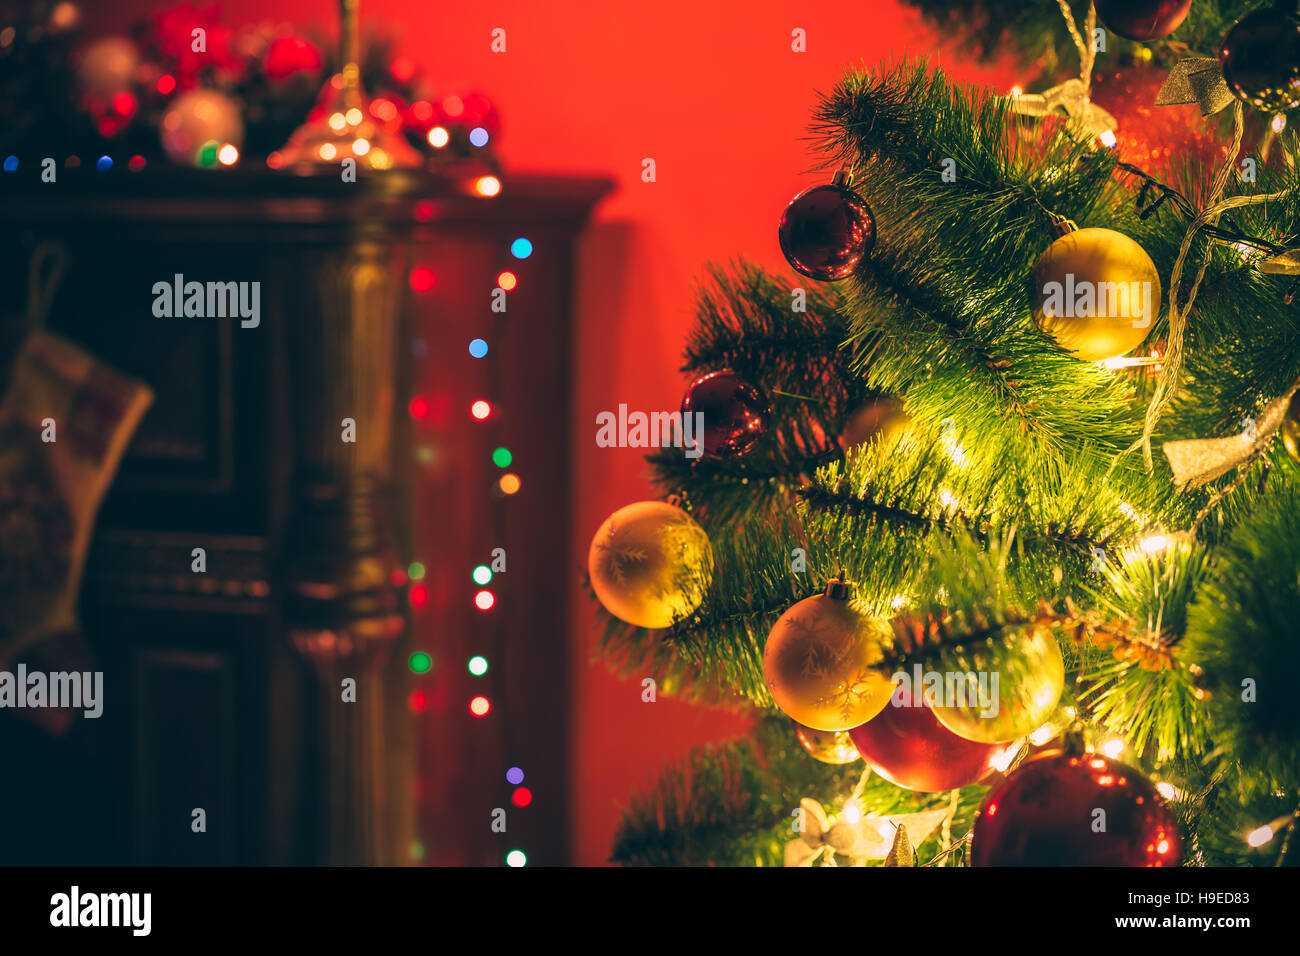 Beautiful decorated Christmas tree with red and goldish baubles and garland, in the new-year background with fireplace and socks. The idea for postcar Stock Photo